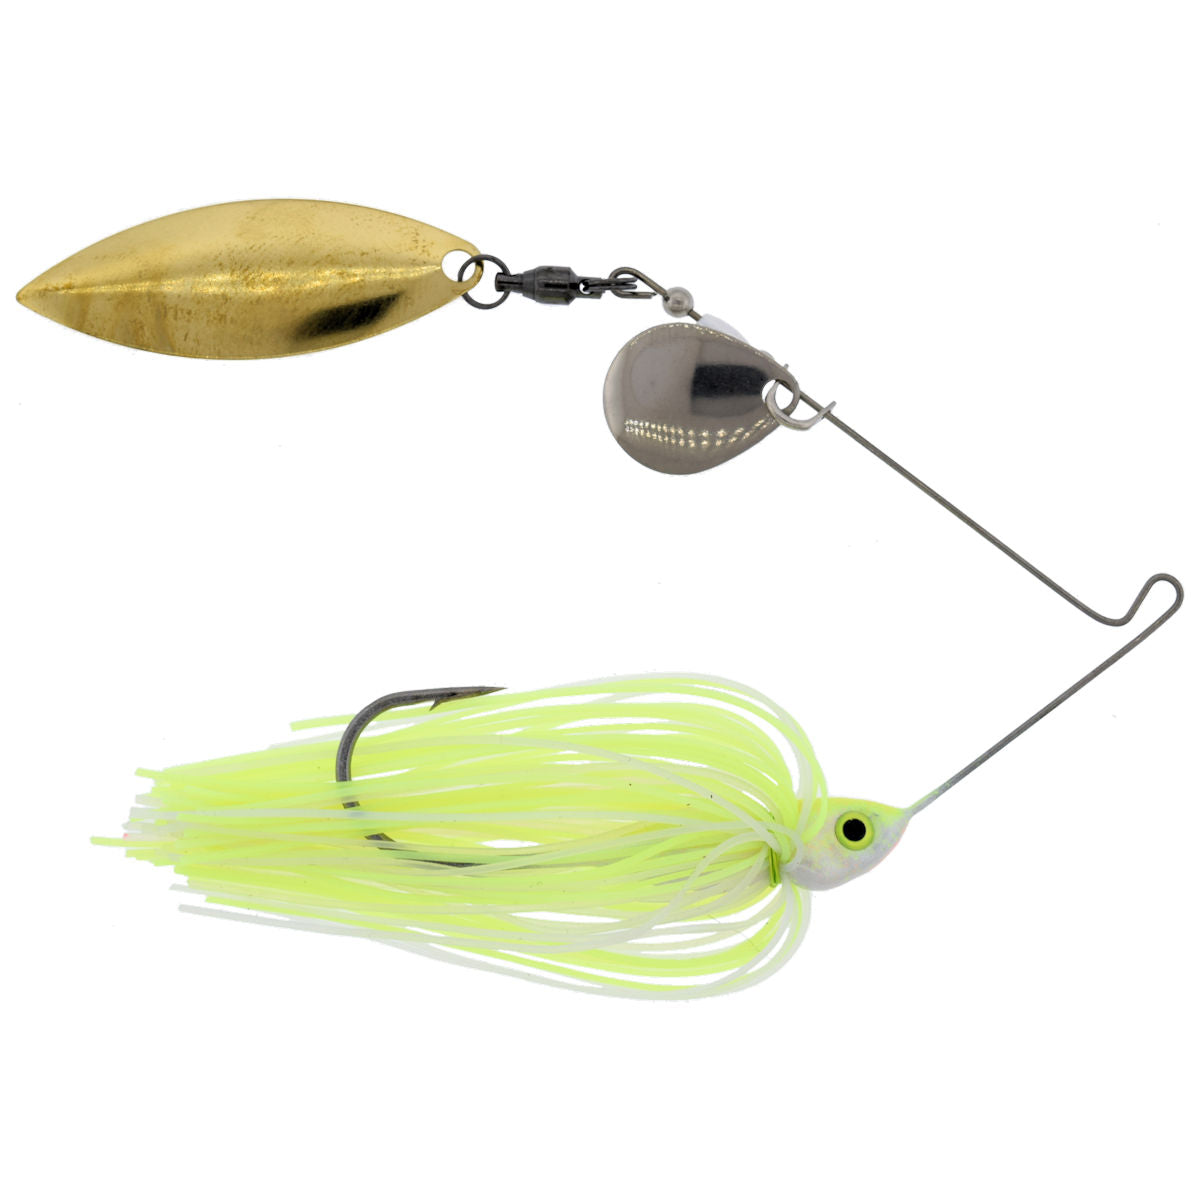 Glimmer Series Colorado/Willow Spinnerbait_Chartreuse Shad - Silver/Gold